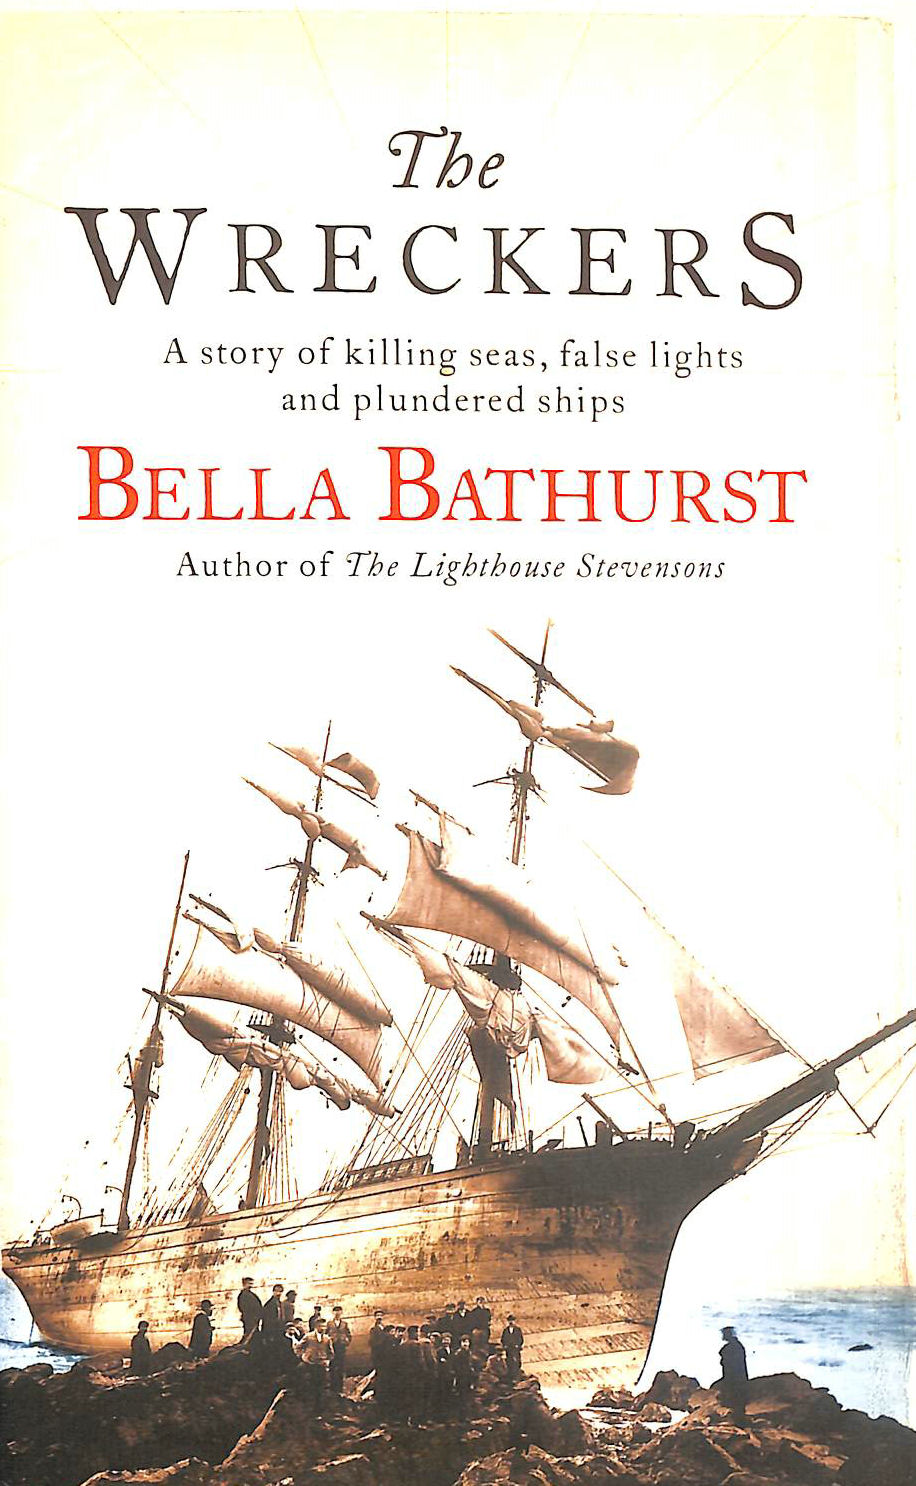 BATHURST, BELLA - The Wreckers: A Story of Killing Seas, False Lights and Plundered Ships